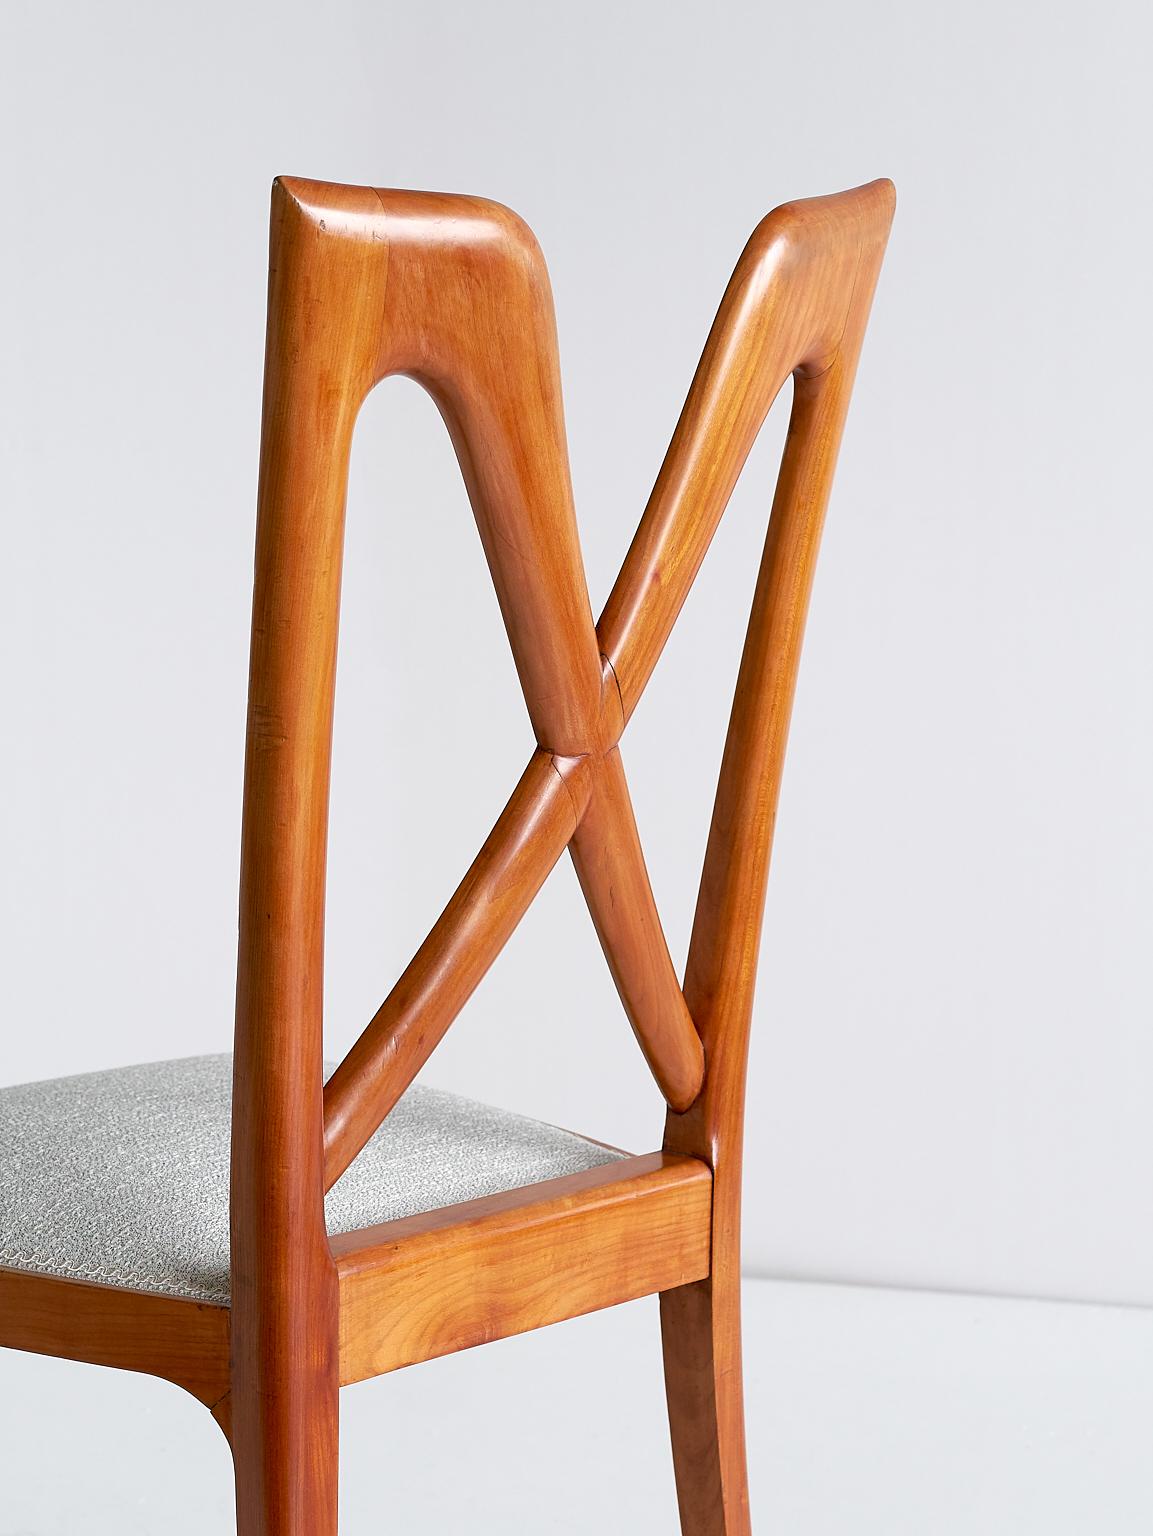 Set of Six Ulderico Carlo Forni Dining Chairs in Cherry Wood, Italy, 1940s For Sale 7